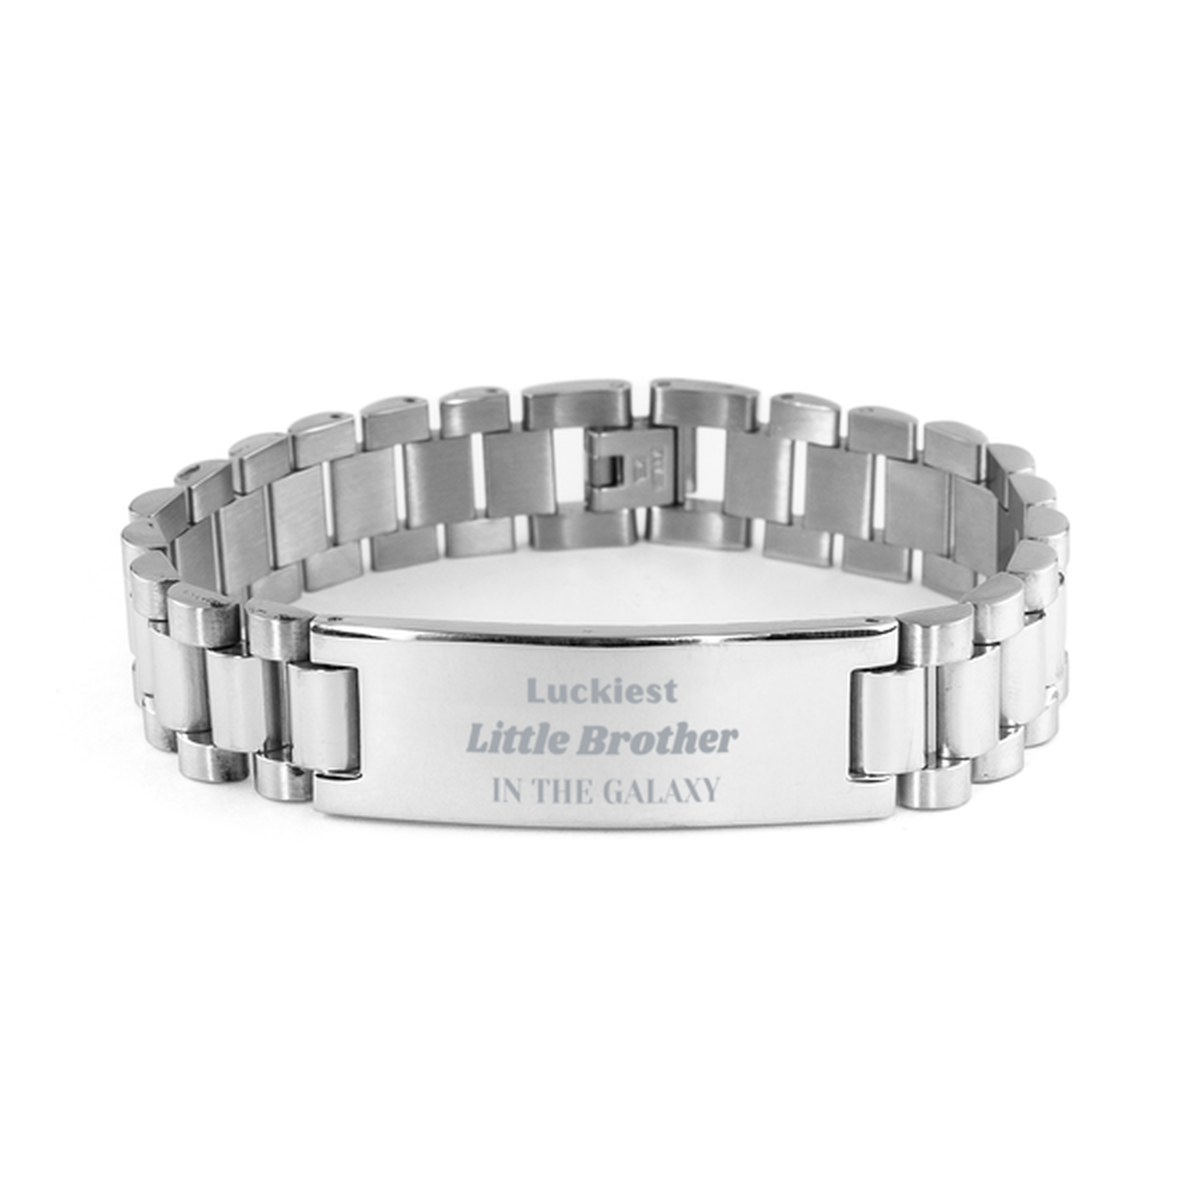 Luckiest Little Brother in the Galaxy, To My Little Brother Engraved Gifts, Christmas Little Brother Ladder Stainless Steel Bracelet Gifts, X-mas Birthday Unique Gifts For Little Brother Men Women